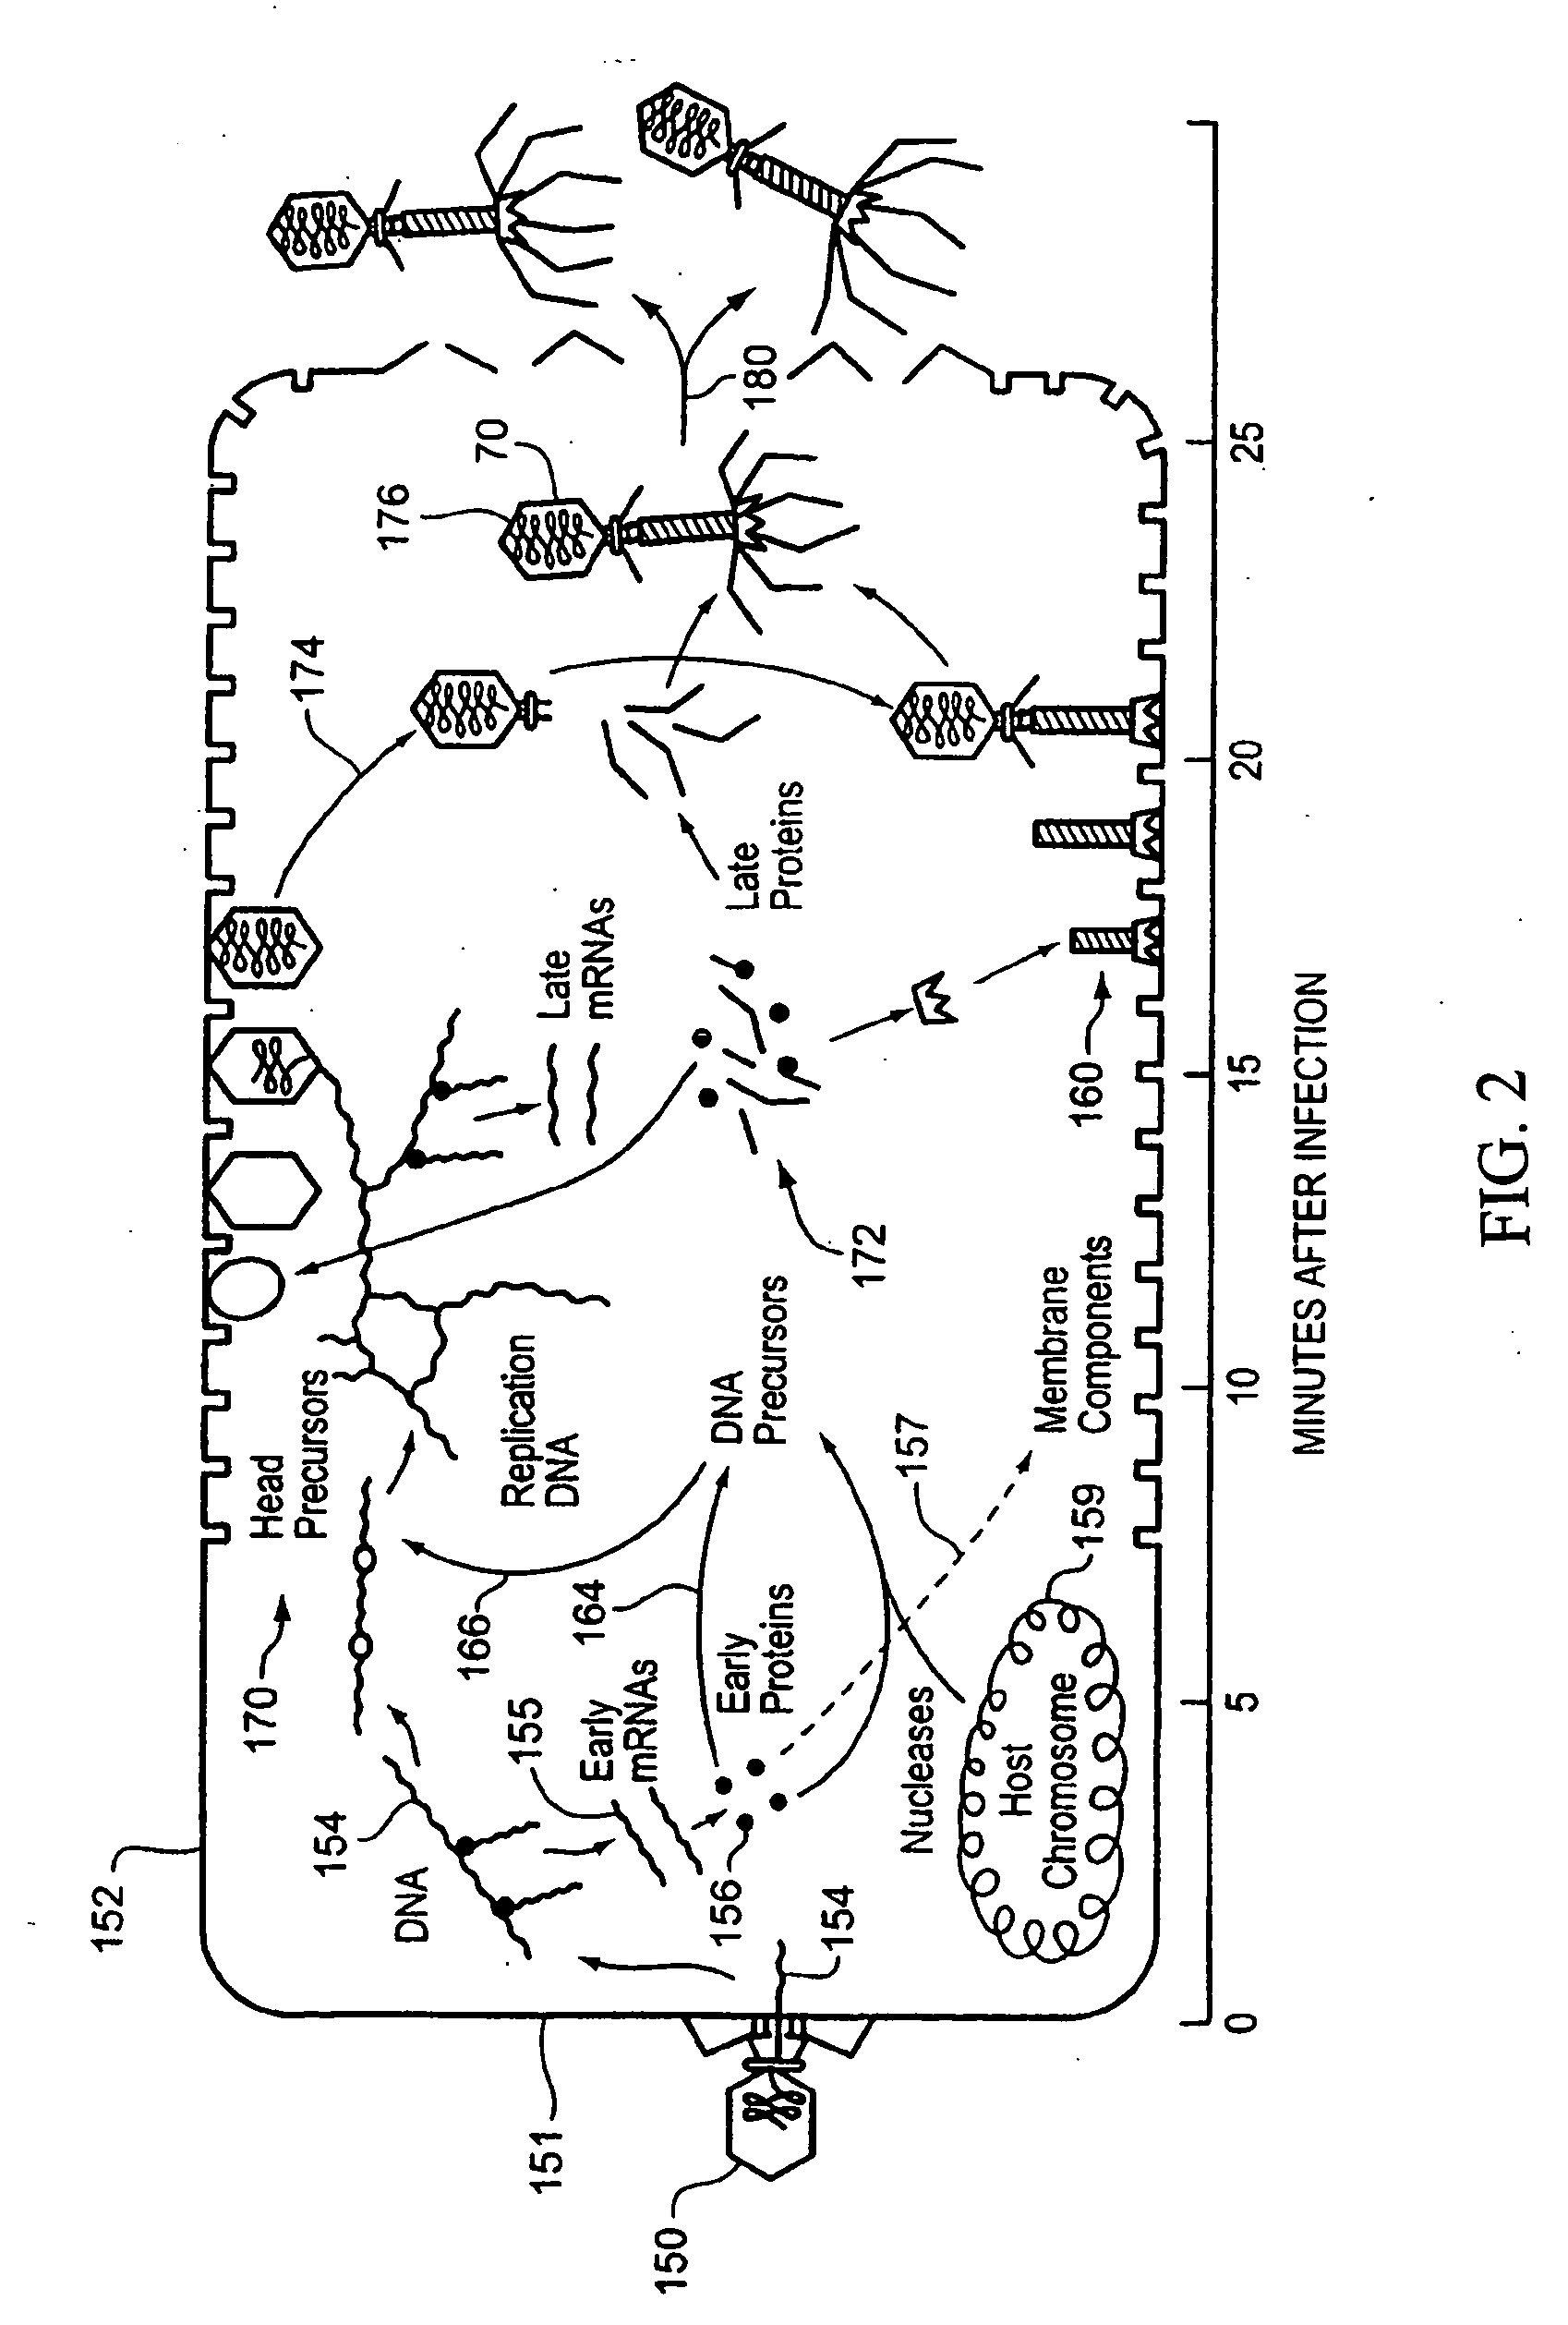 Apparatus and method for detecting microscopic organisms using bacteriophage